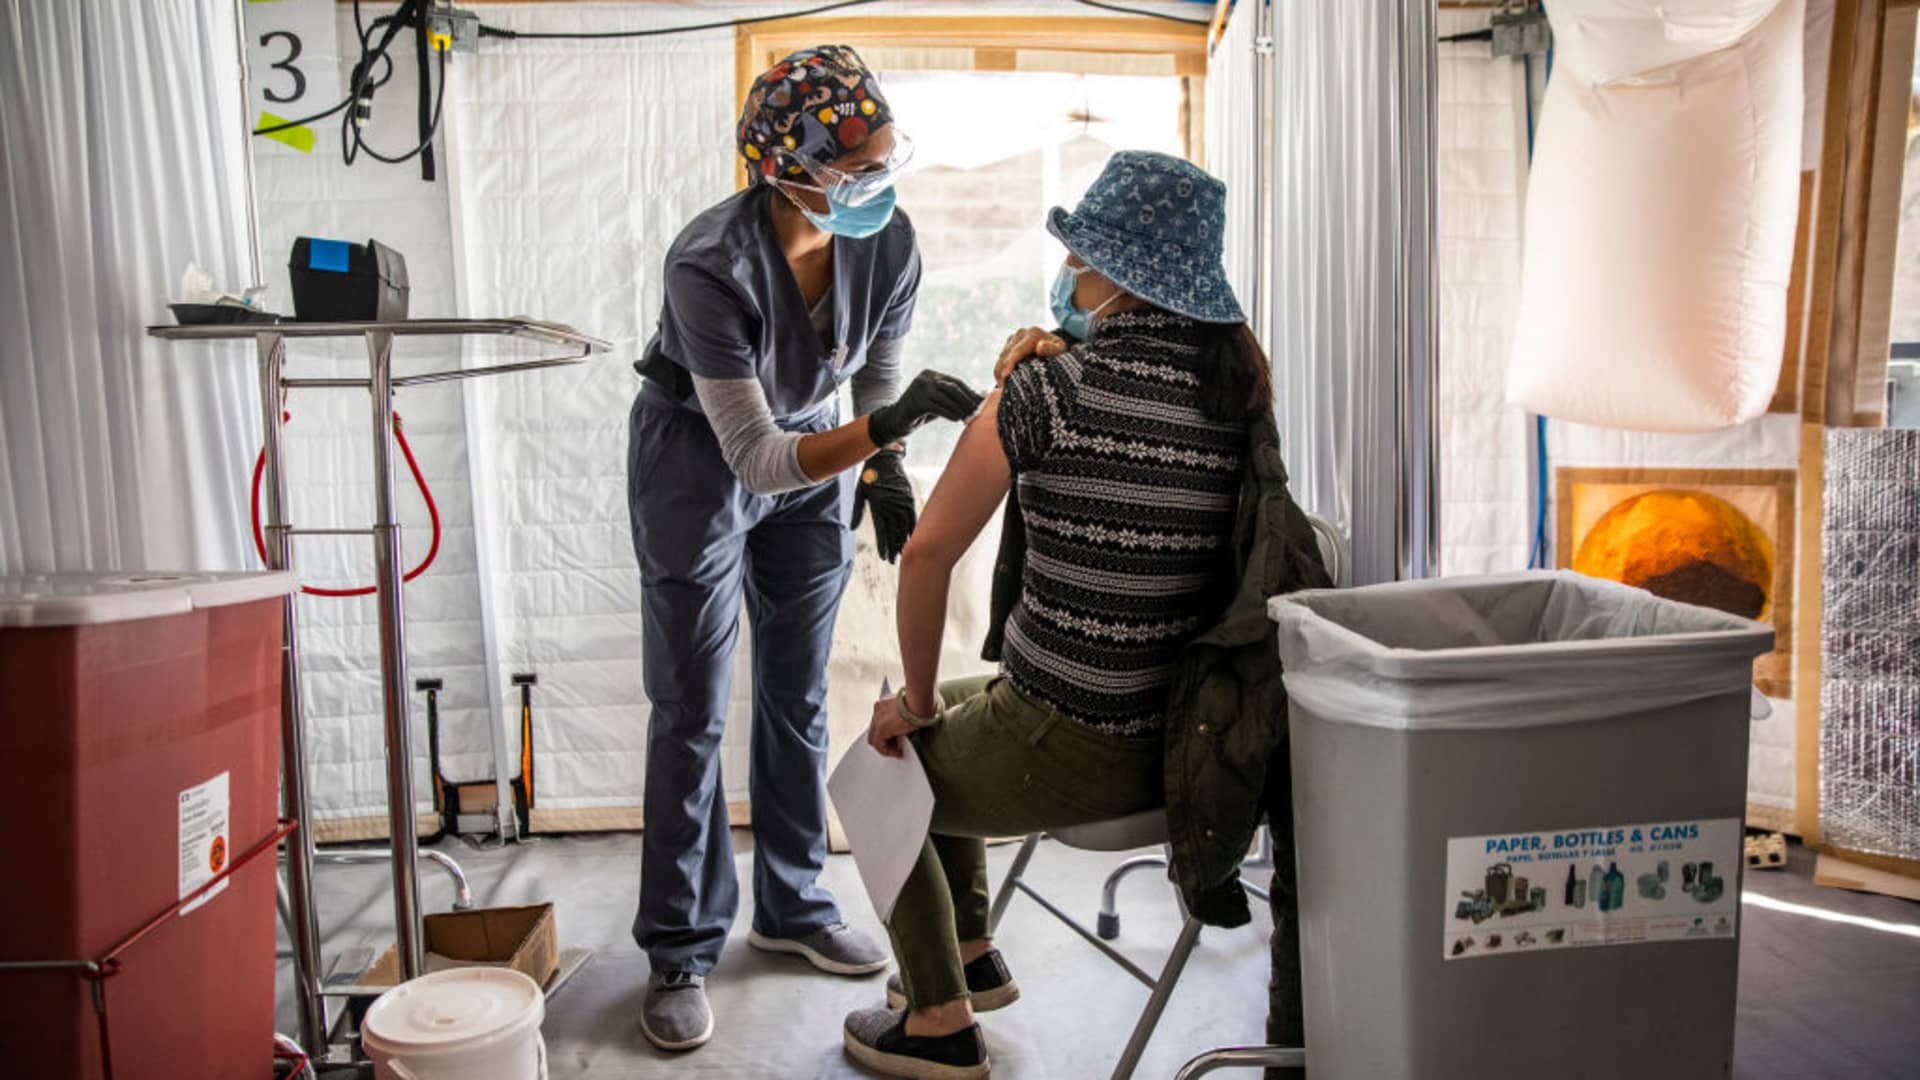 Anjali Sundararaman, a student nurse at San Francisco State University, administers a dose of Moderna COVID-19 vaccine to Cuixia Xu during a vaccination clinic at the Southeast Health Center in the Bayview-Hunters Point neighborhood in San Francisco, California on Monday, Feb. 8, 2021.